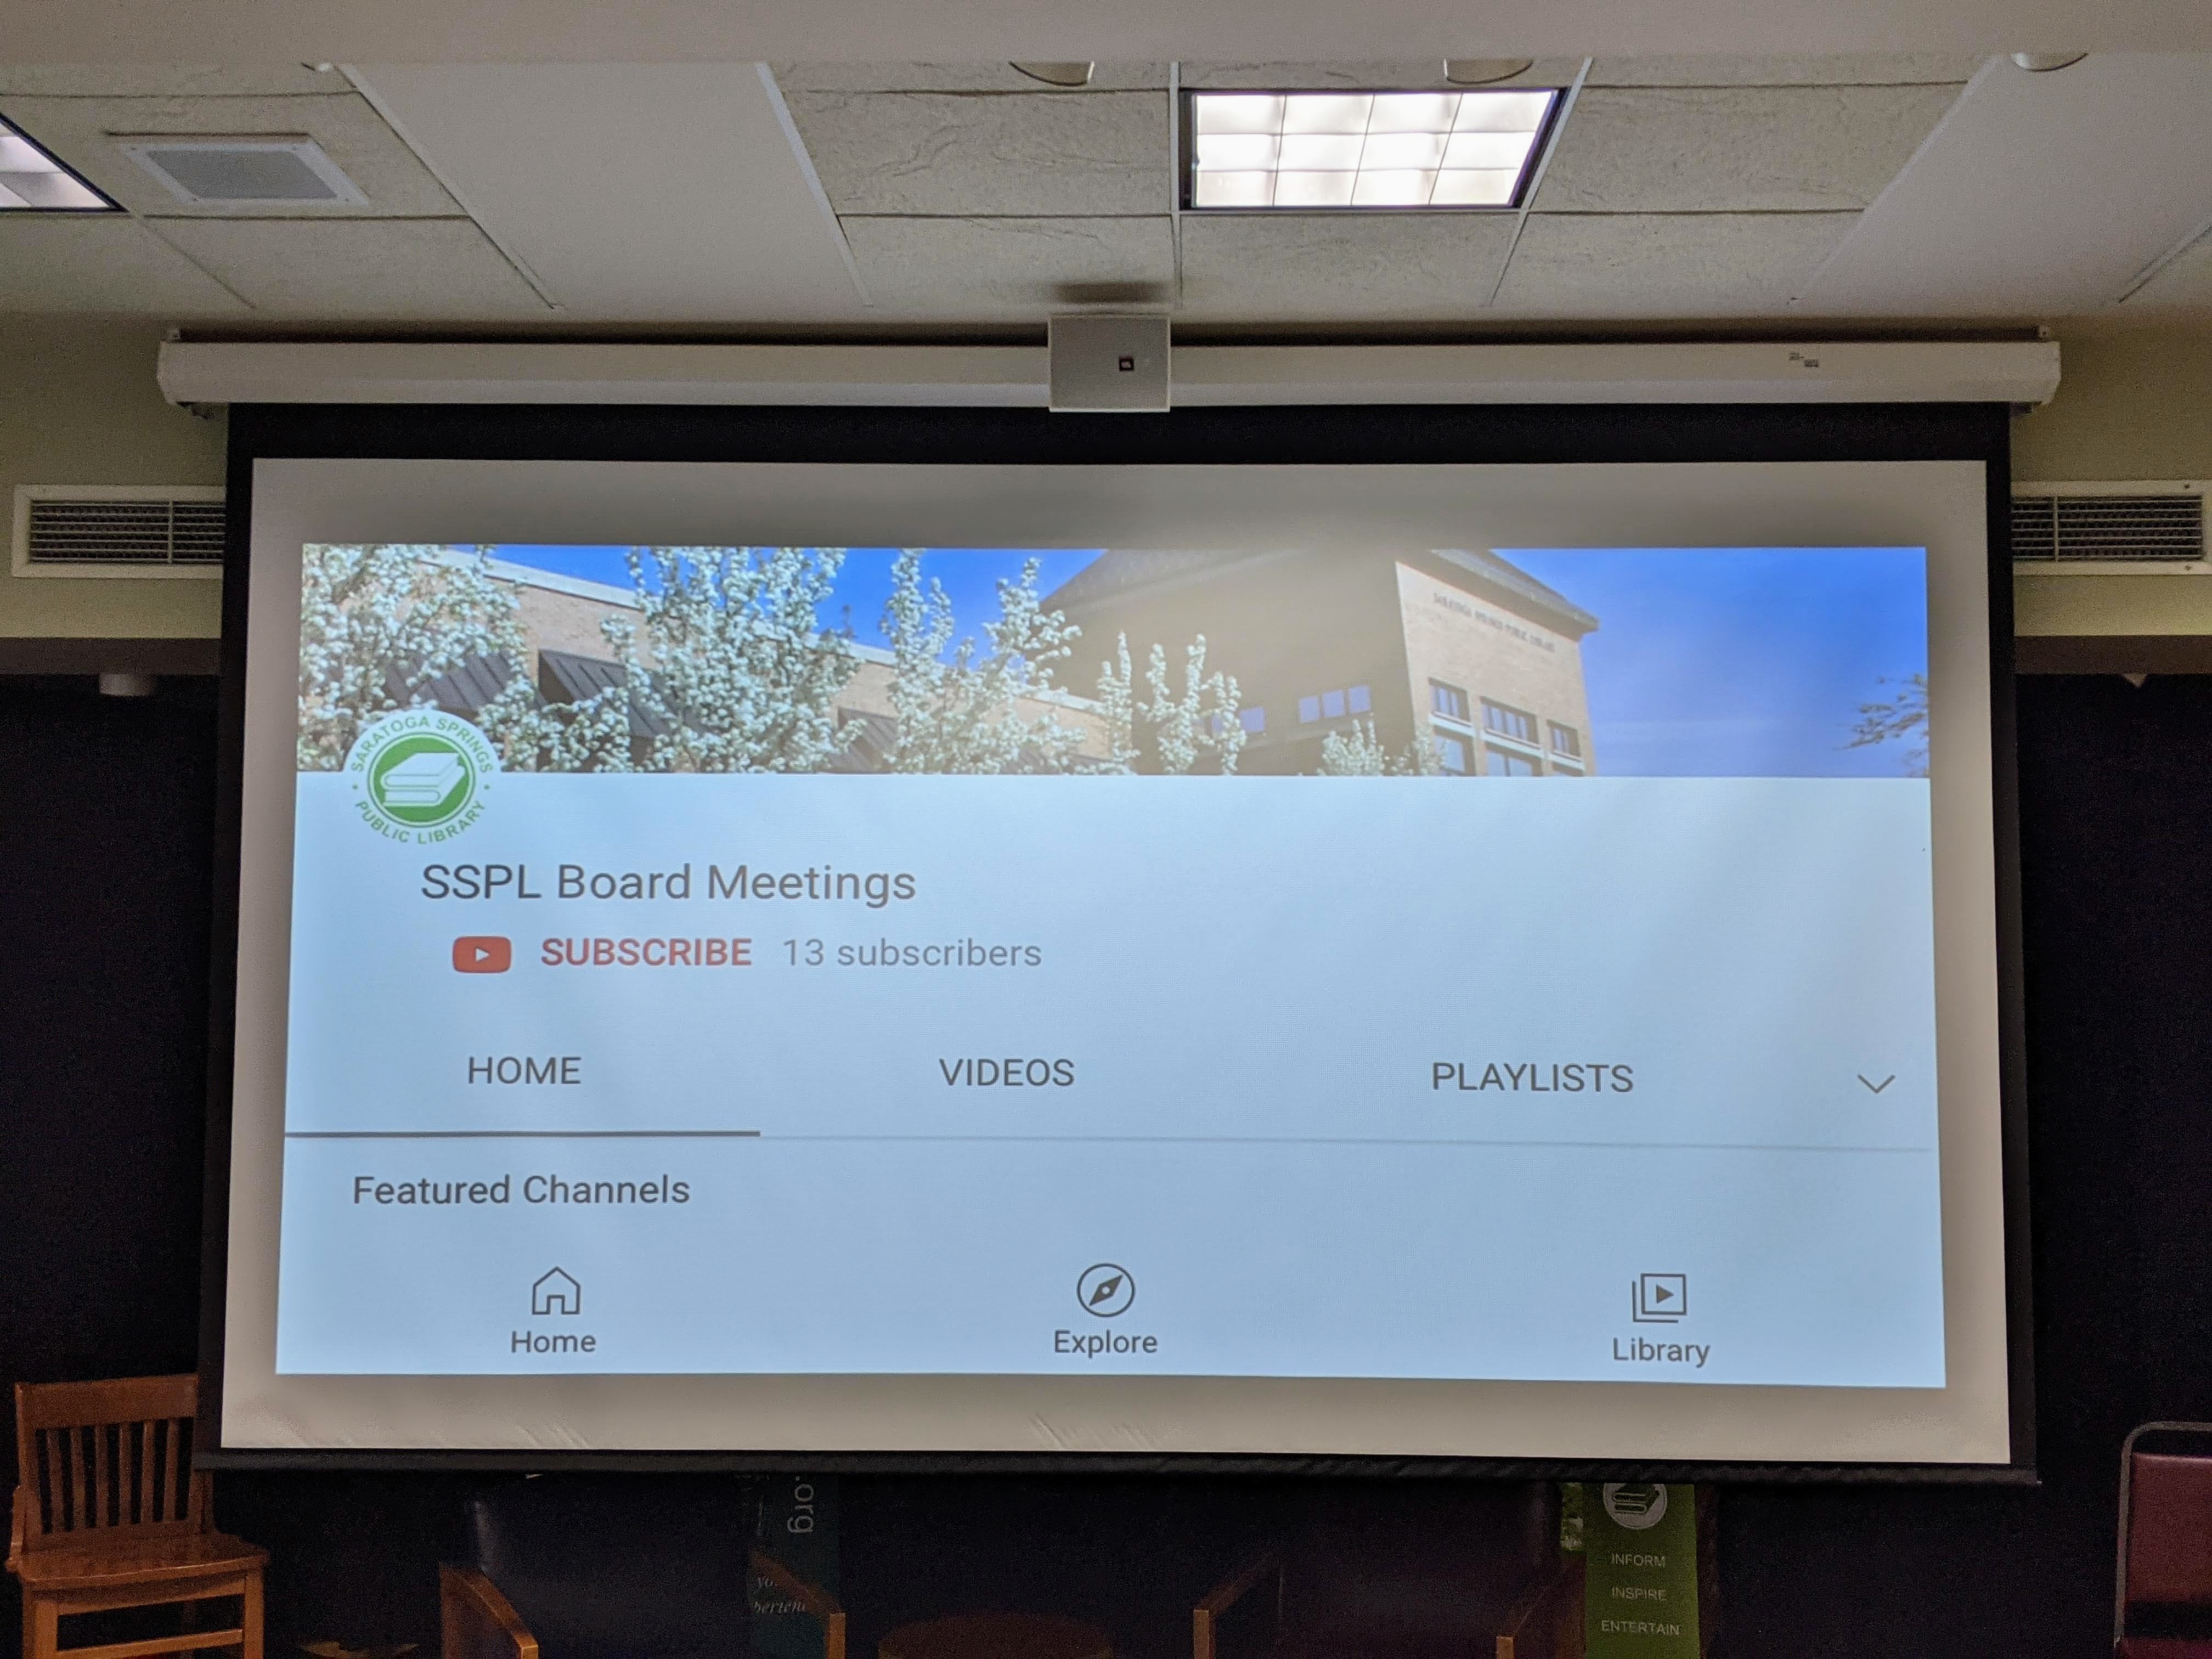 Large format projector screen demonstrated by showing the public library’s YouTube account’s Board Meetings’ homepage.